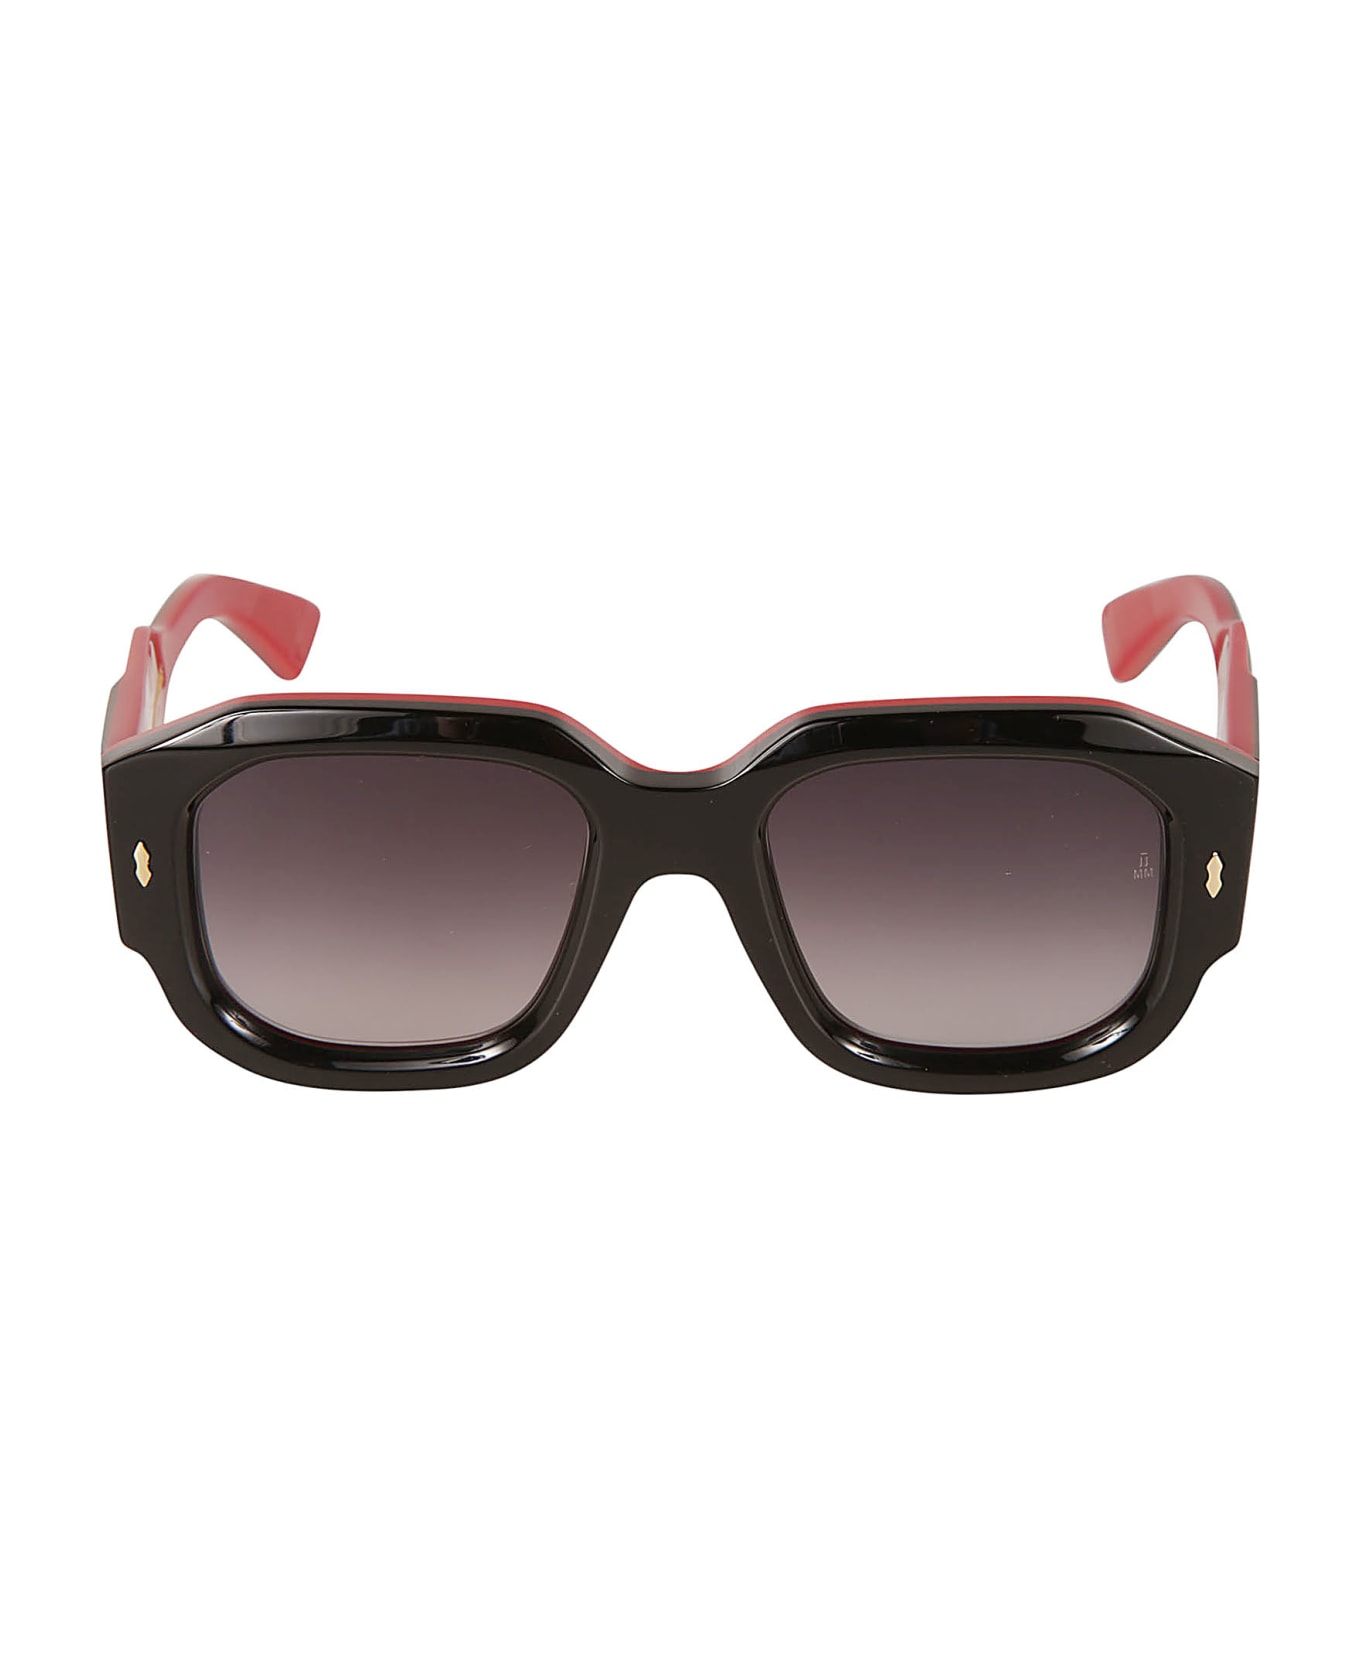 Jacques Marie Mage Lacy Sunglasses - Nightfall